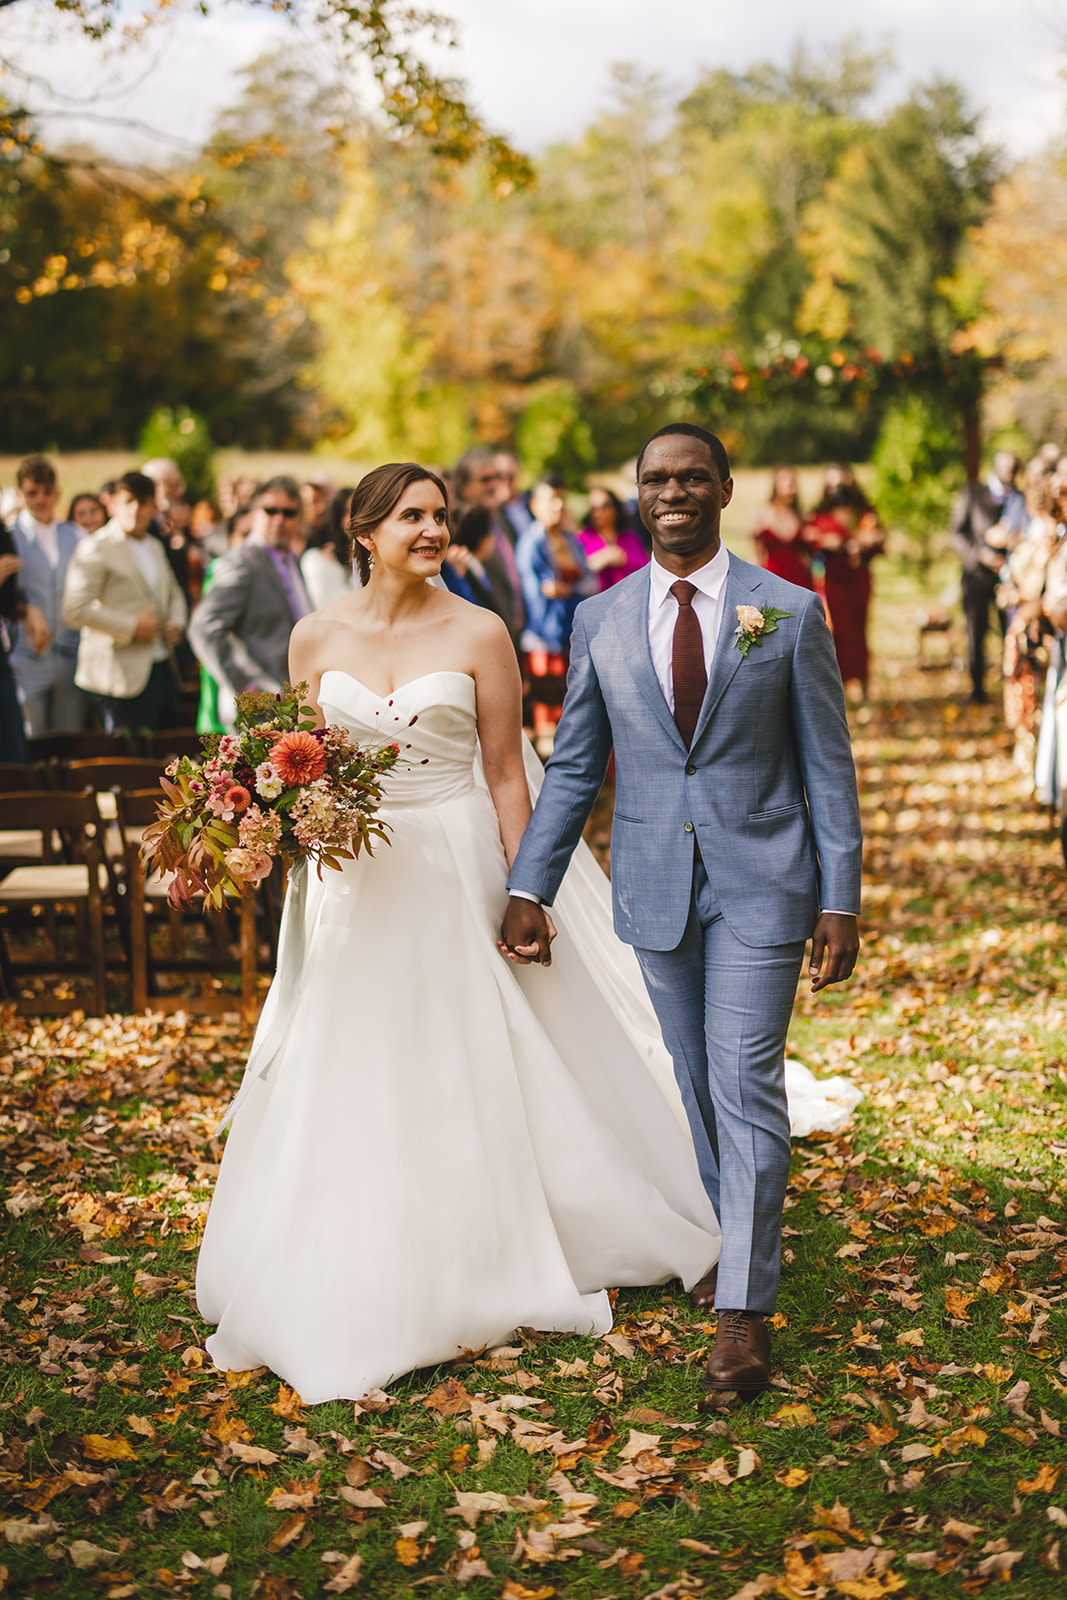 a smiling bride and groom walk together after their outdoor fall wedding ceremony